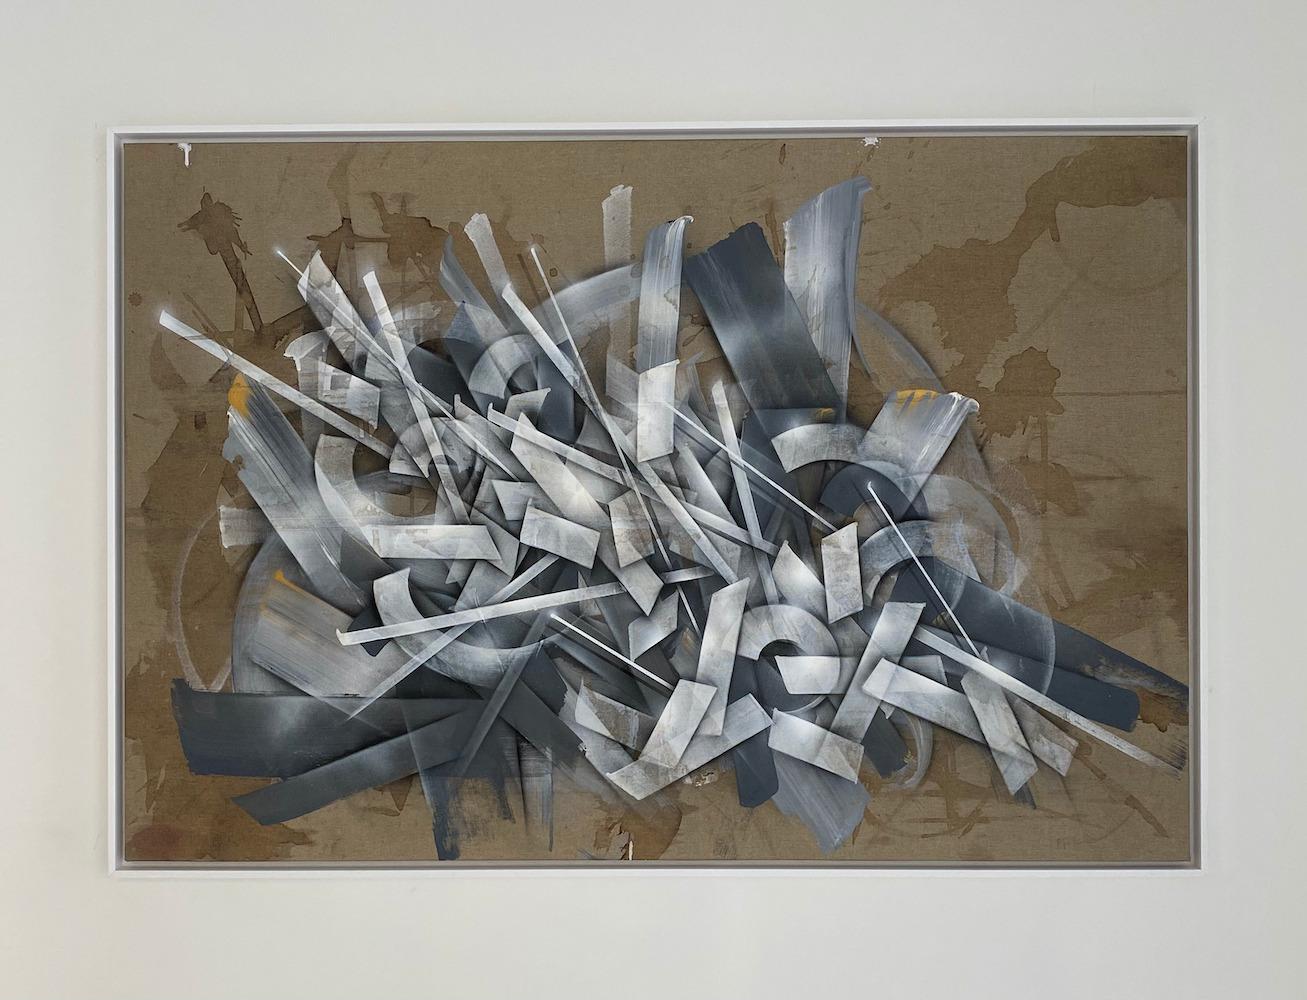 DMVT 1303 is a work on canvas by French contemporary artist Soklak.

This work comes from the tradition of graffiti, whose artistic process consists in the inscription of typographic motifs on the street. In this painting, we find the notion of